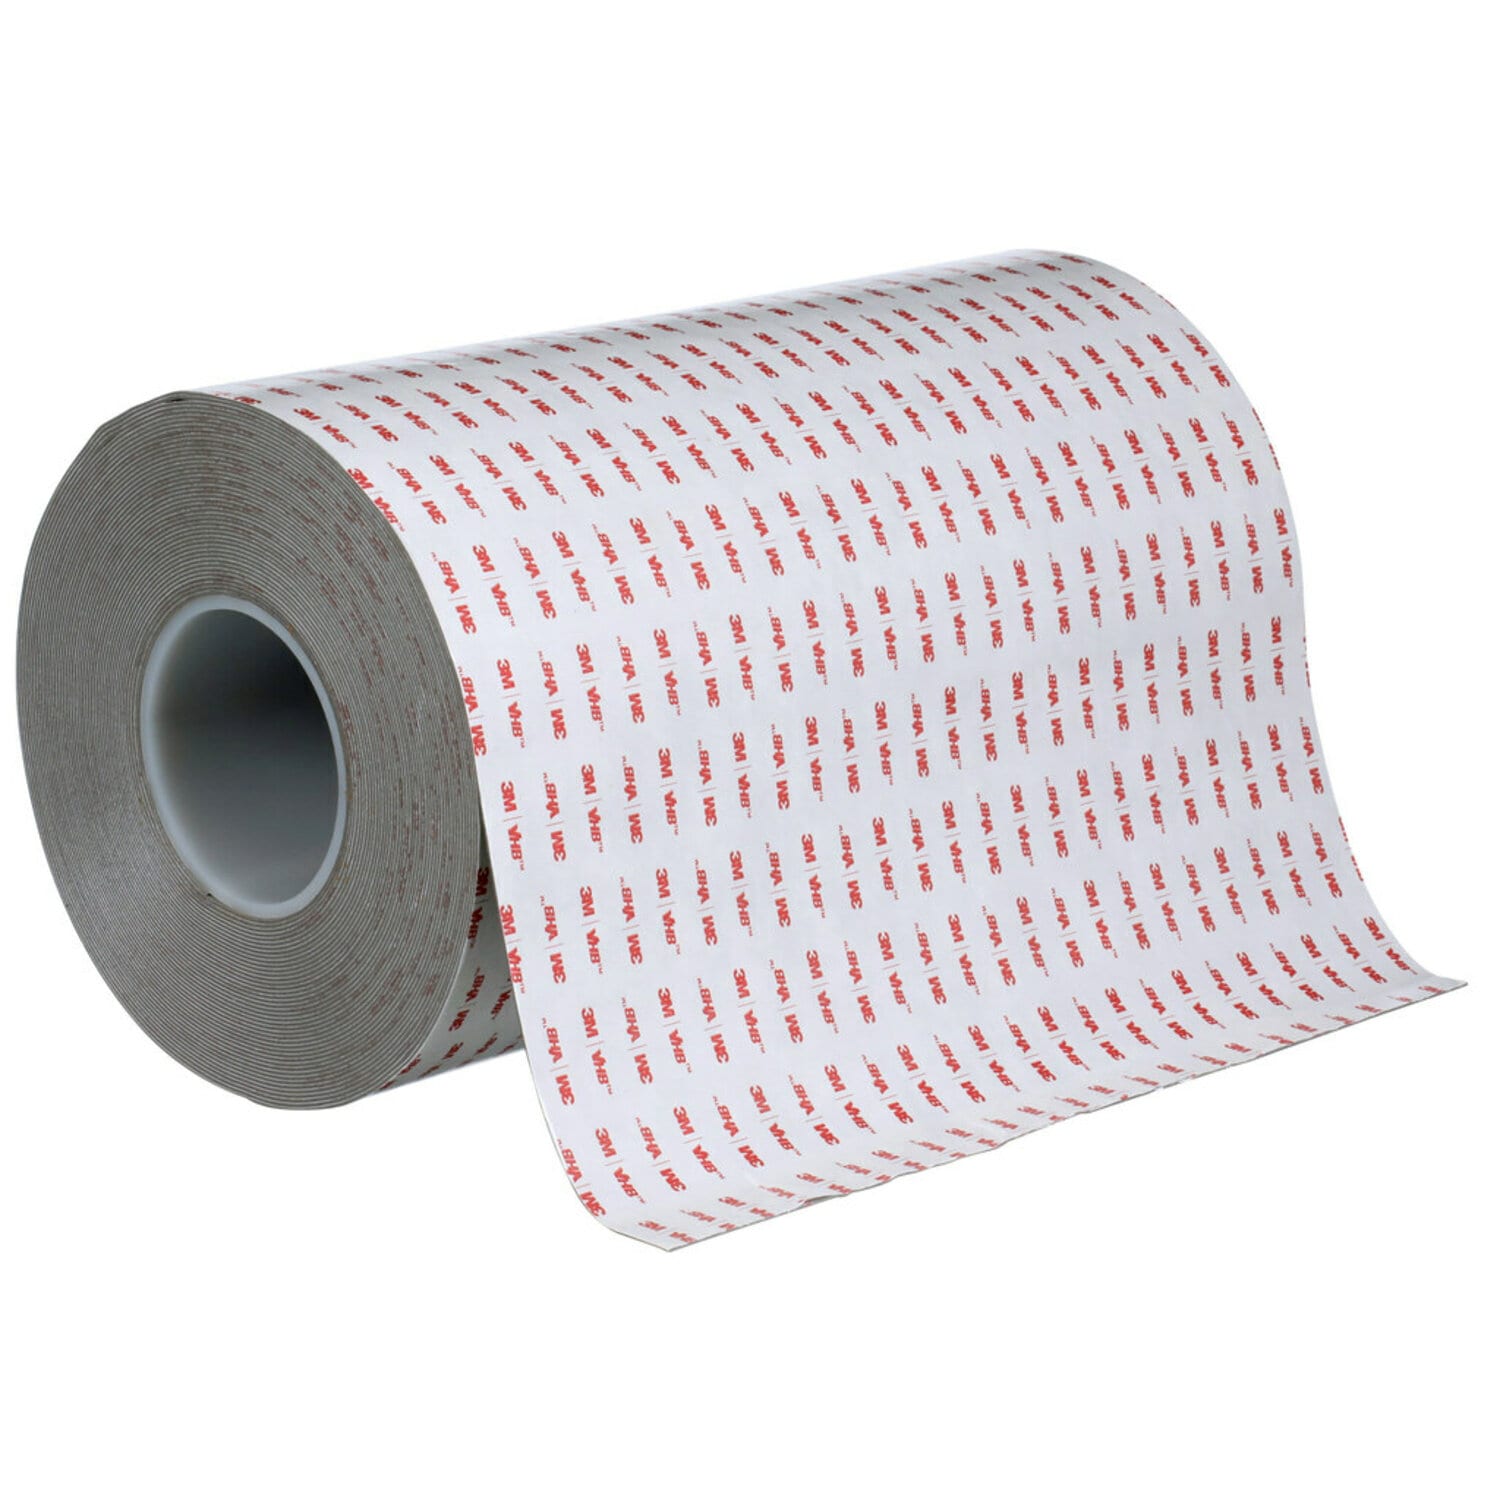 7100273401 - 3M VHB Tape RP+080GP, Gray, 22 in x 36 yd, 32 mil, Paper Liner, 1 Roll/Case